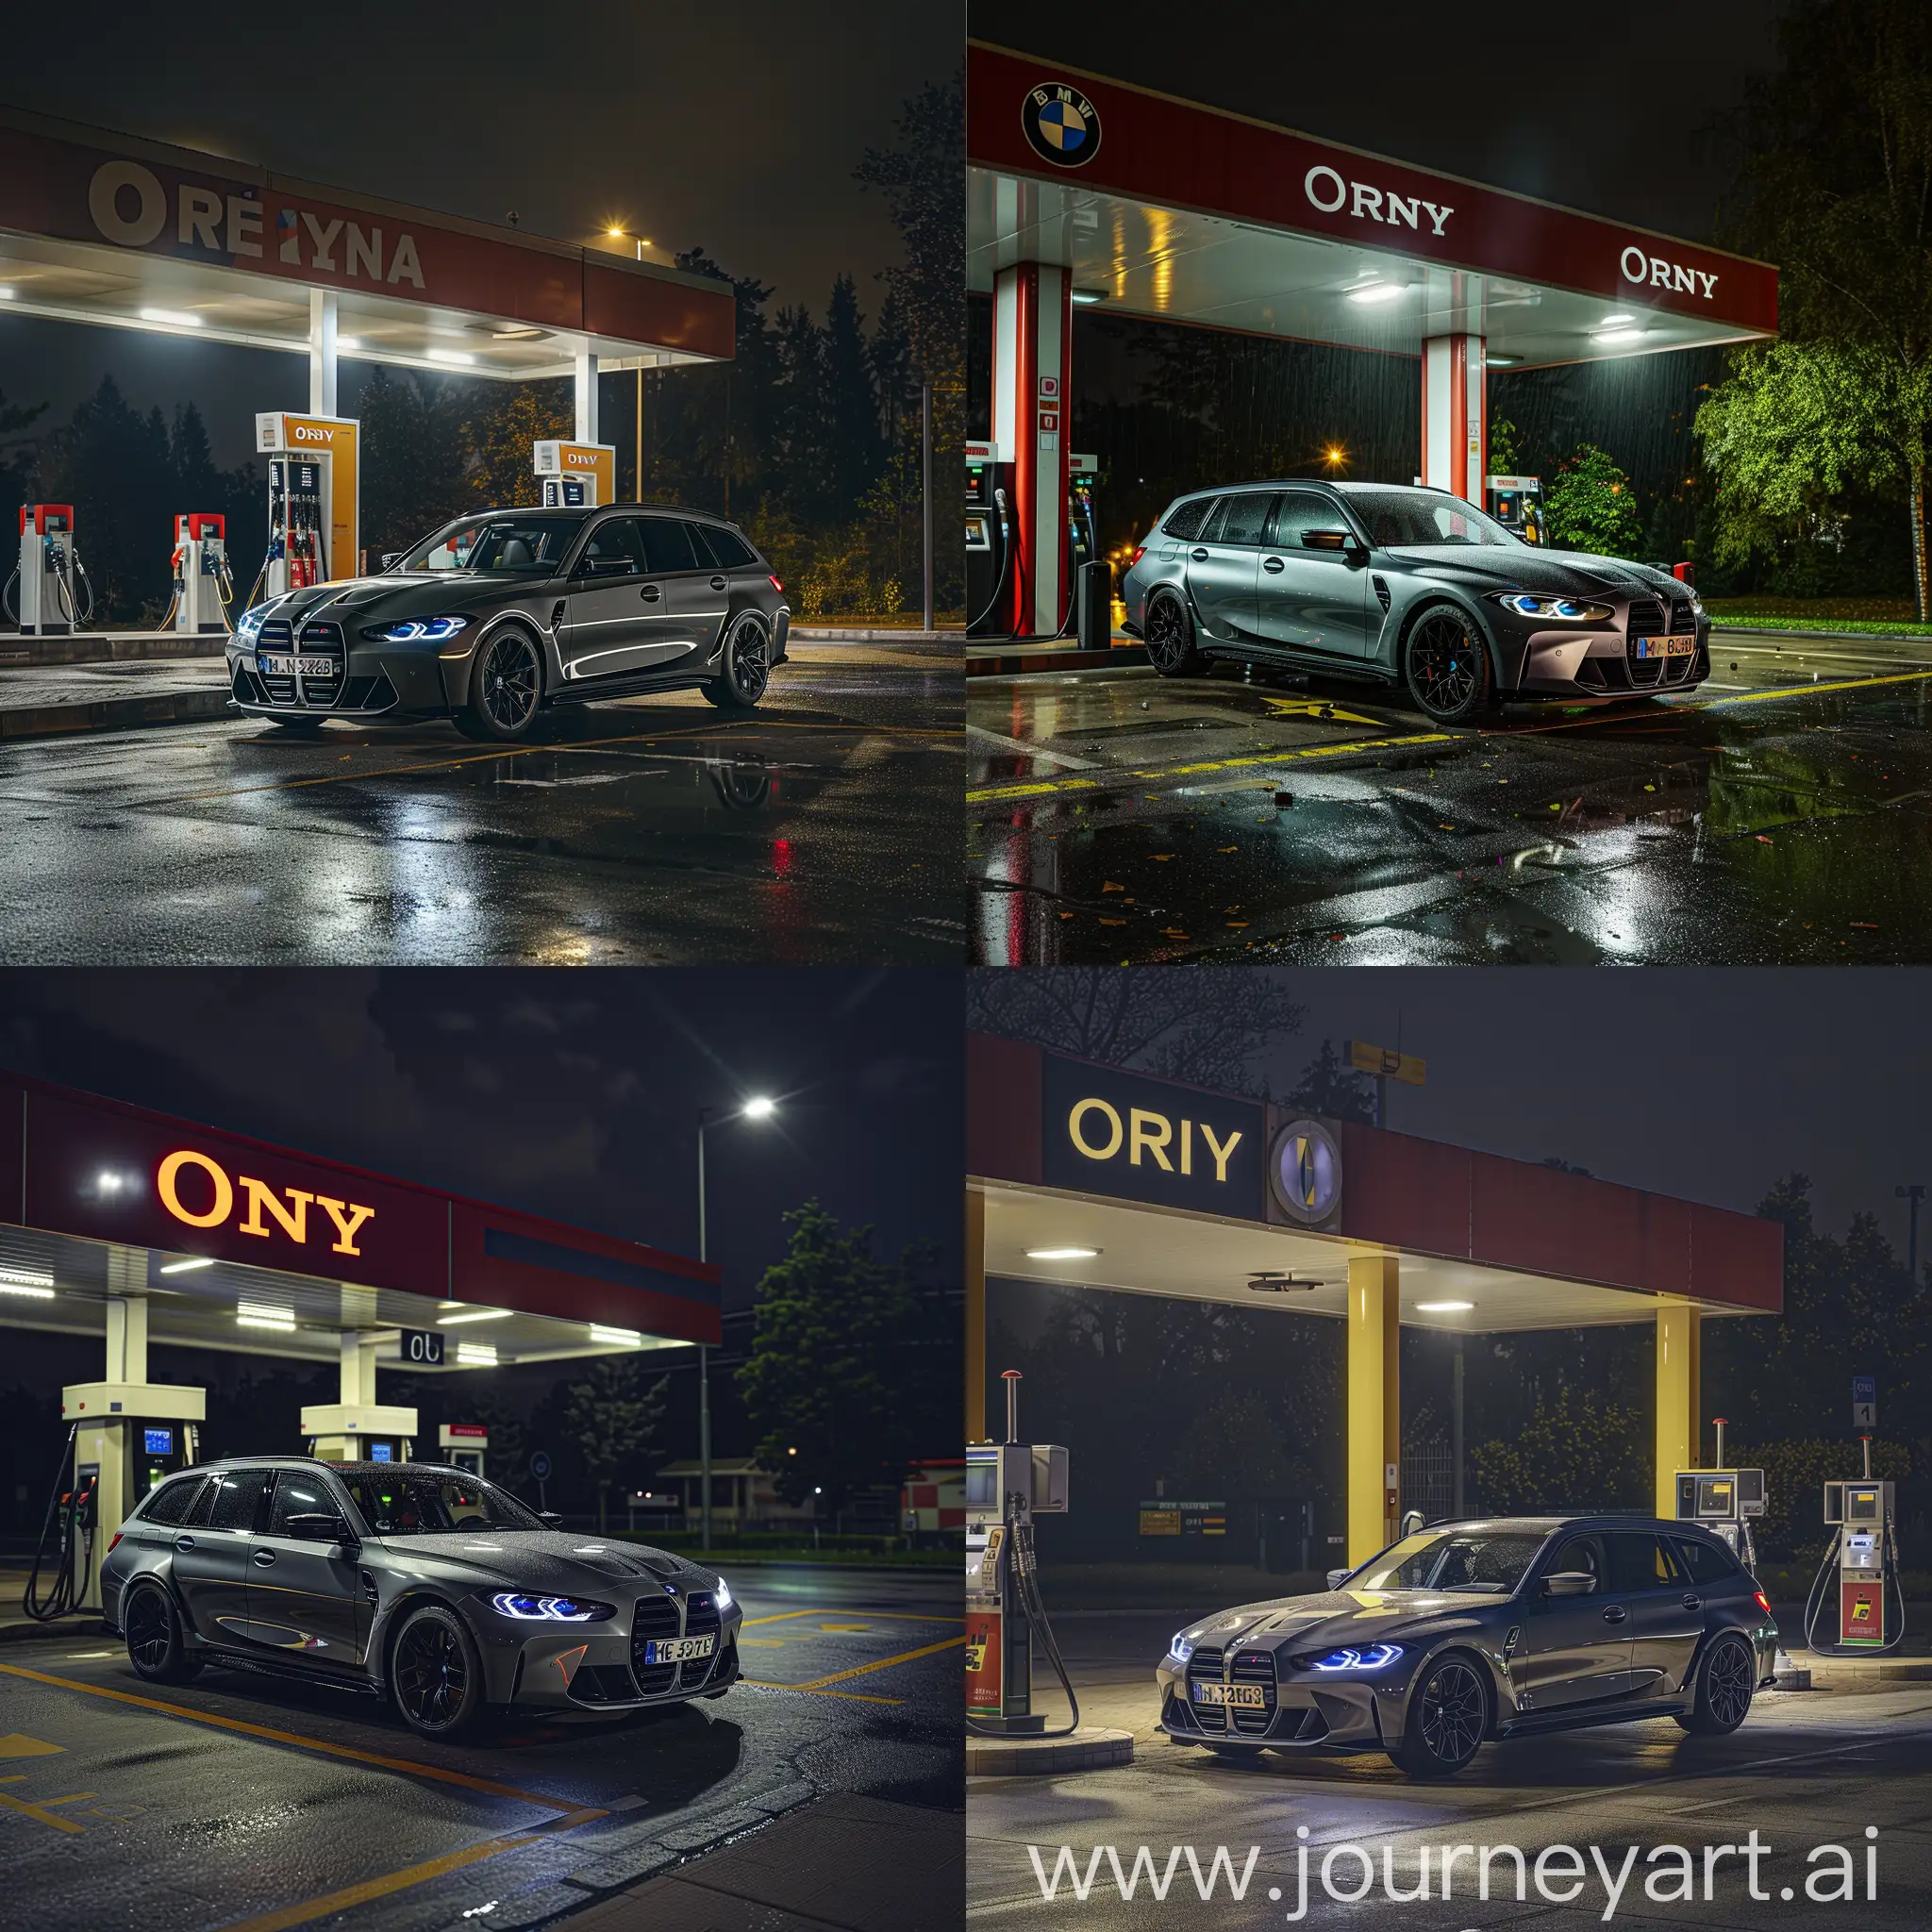 Dynamic-Night-Photography-Illuminated-BMW-M3-Touring-at-Orlen-Fuel-Station